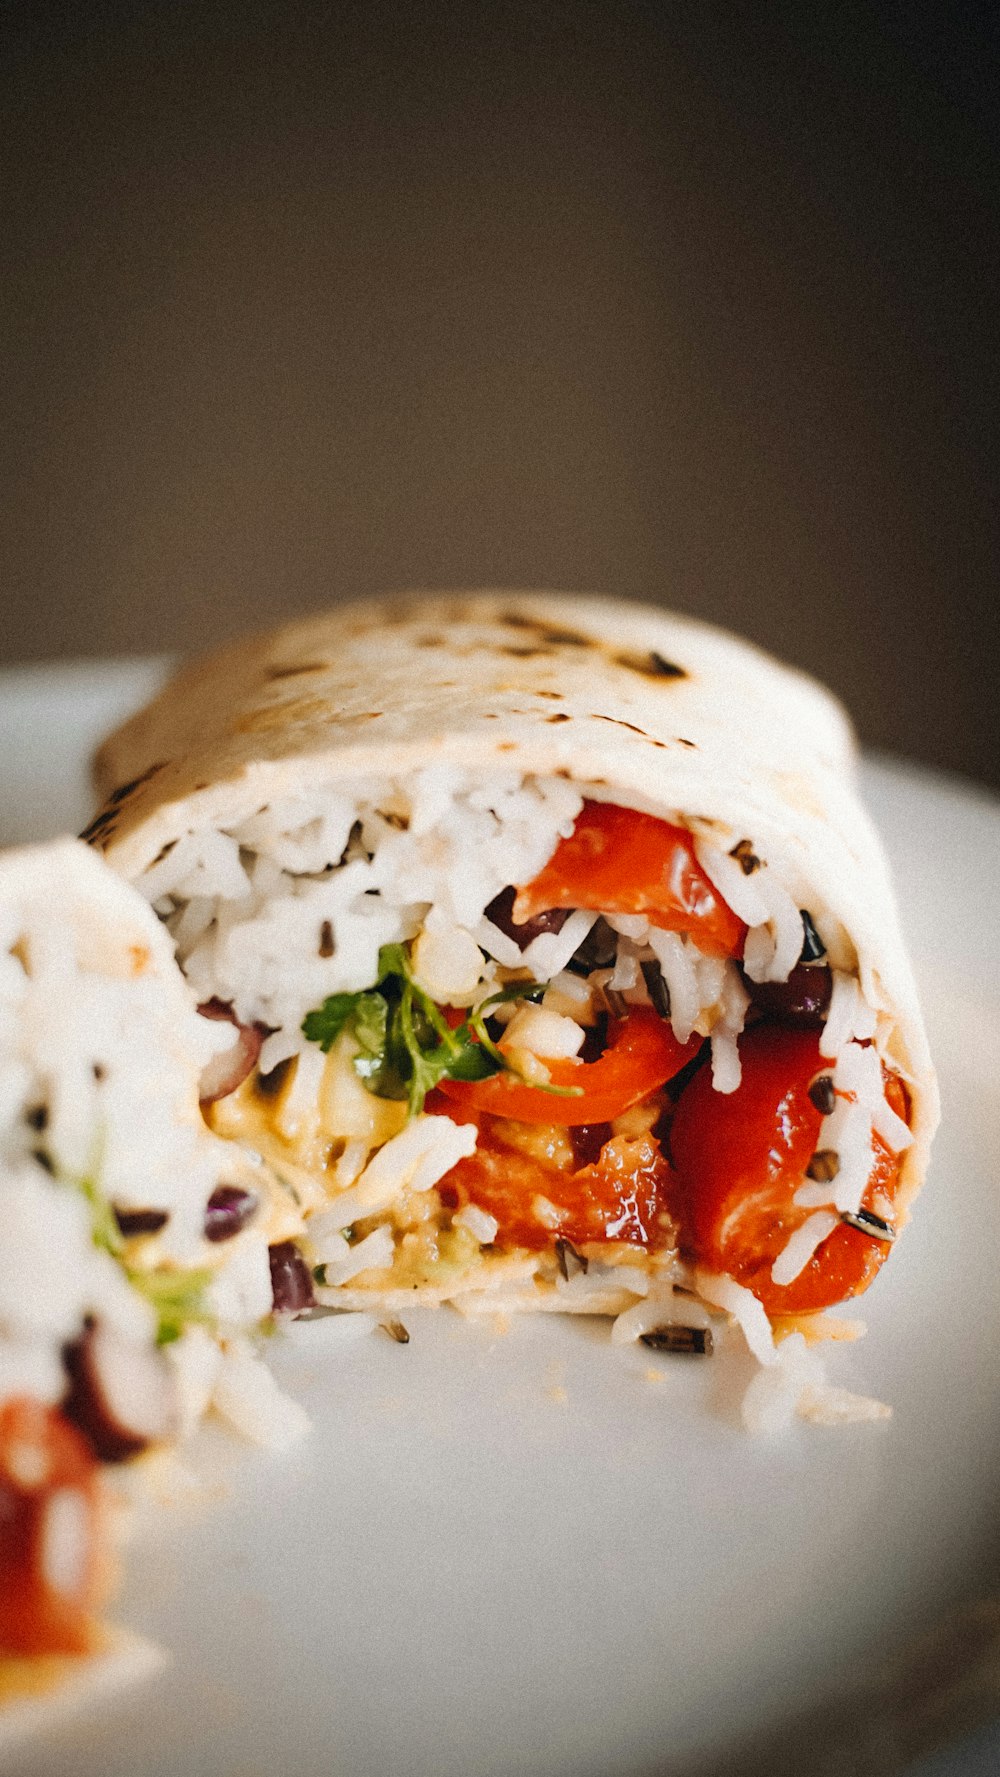 a close up of a burrito on a plate